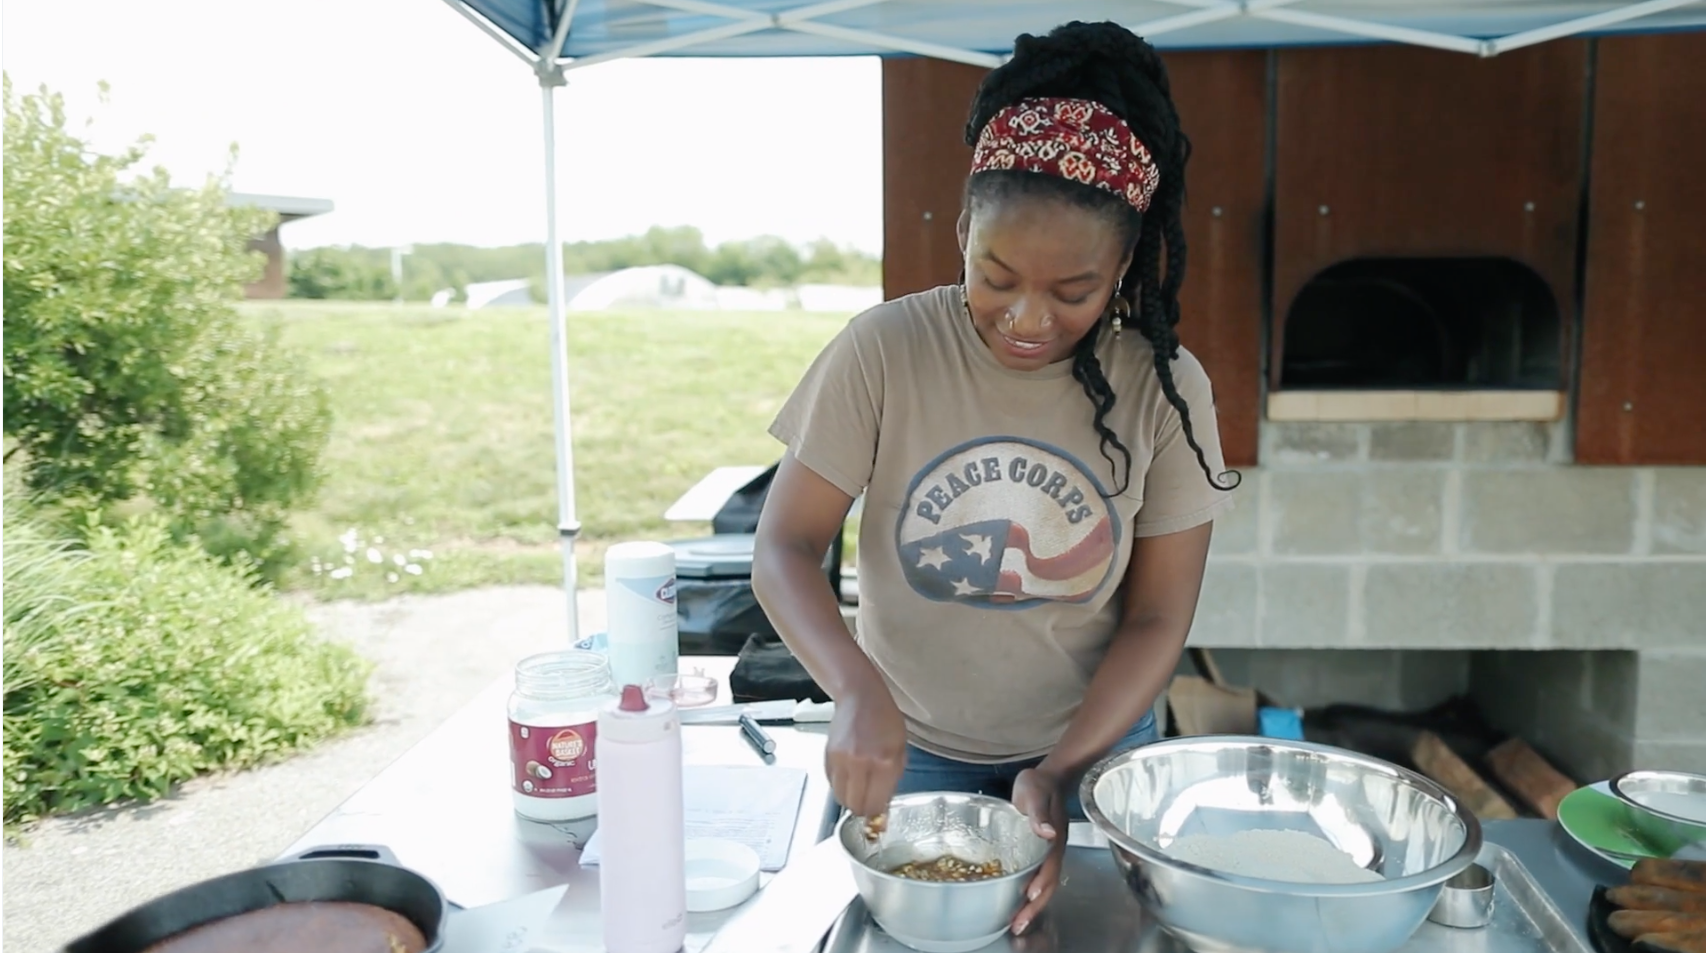 Photo of a Black woman in a Peace Corps shirt, stirring food in a metal bowl, by the Eden Hall Campus Community Bread Oven